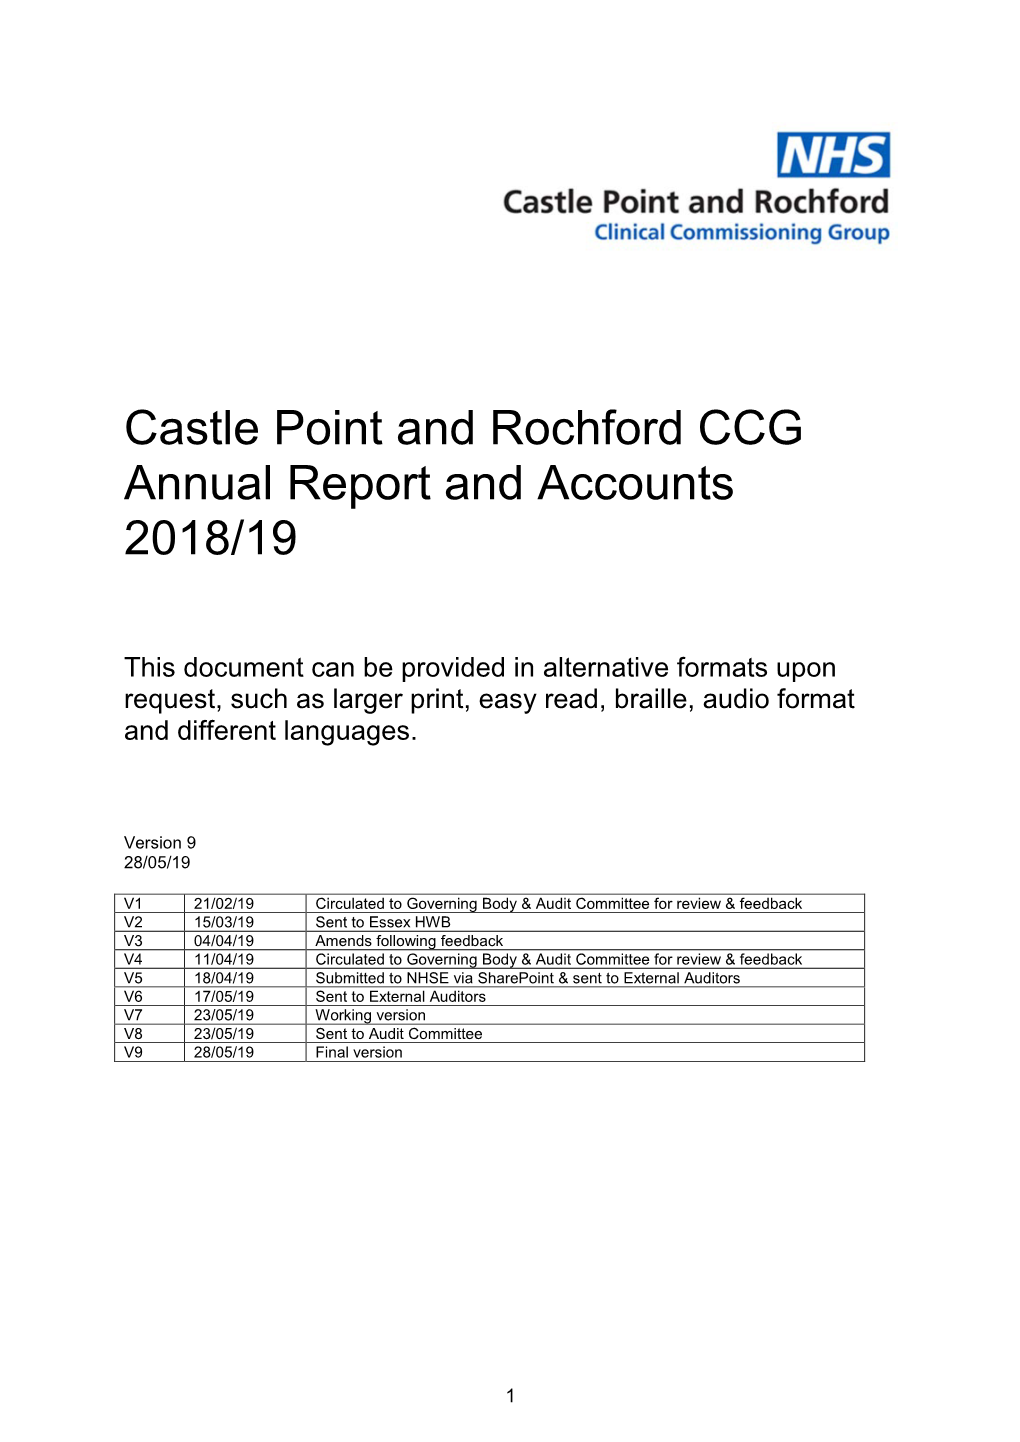 Castle Point and Rochford CCG Annual Report and Accounts 2018/19